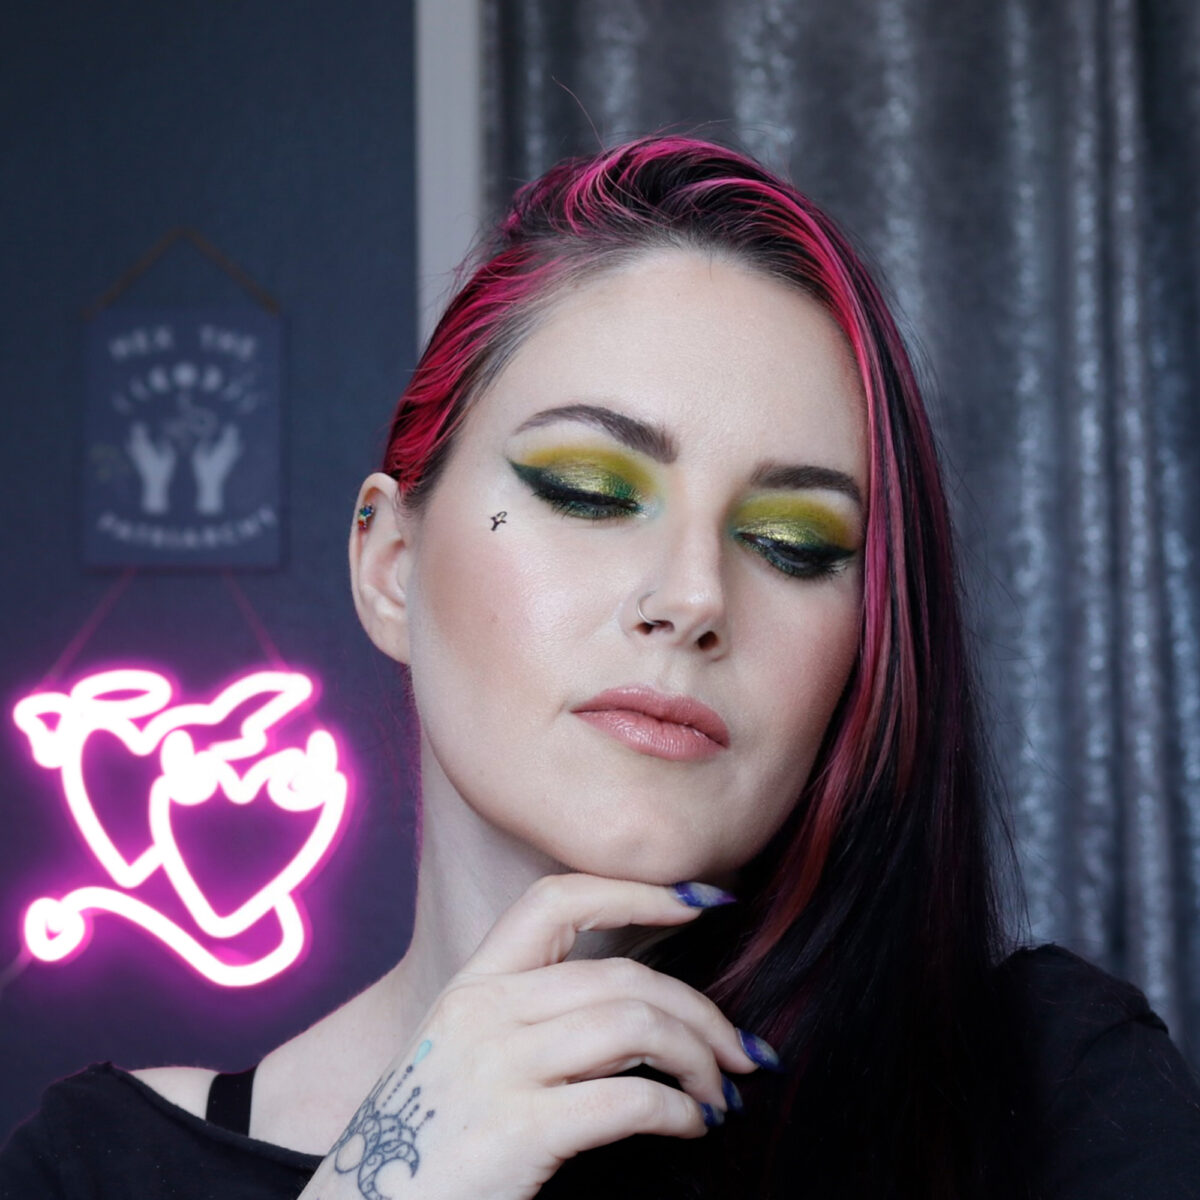 Edgy makeup inspiration featuring Luna's About Face holographic eye paint